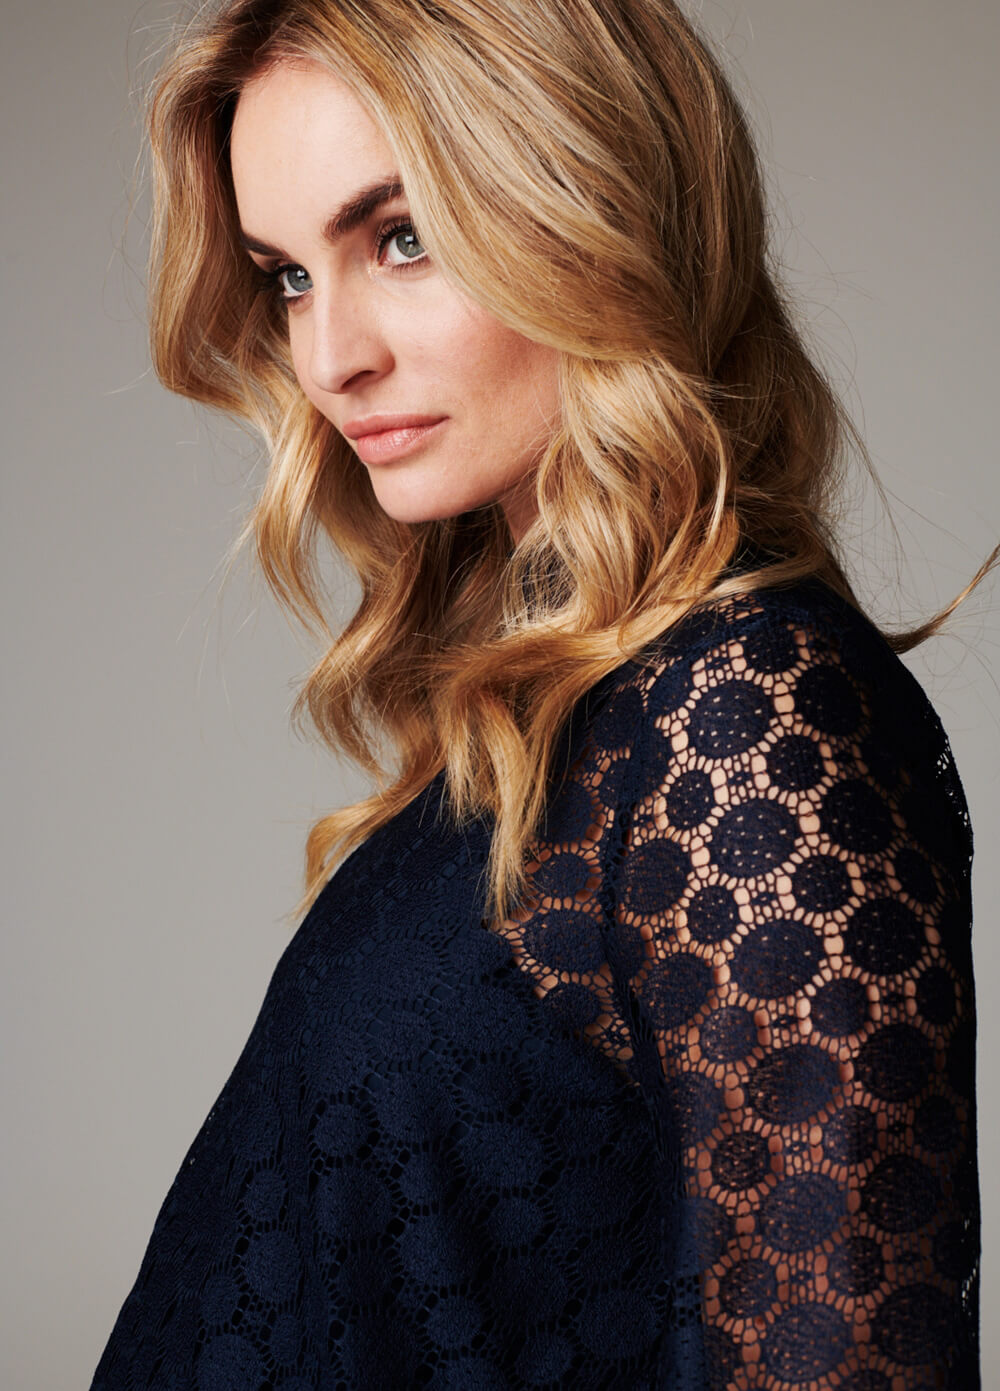 Mae Openwork Lace Maternity Blouse in Dark Blue by Noppies